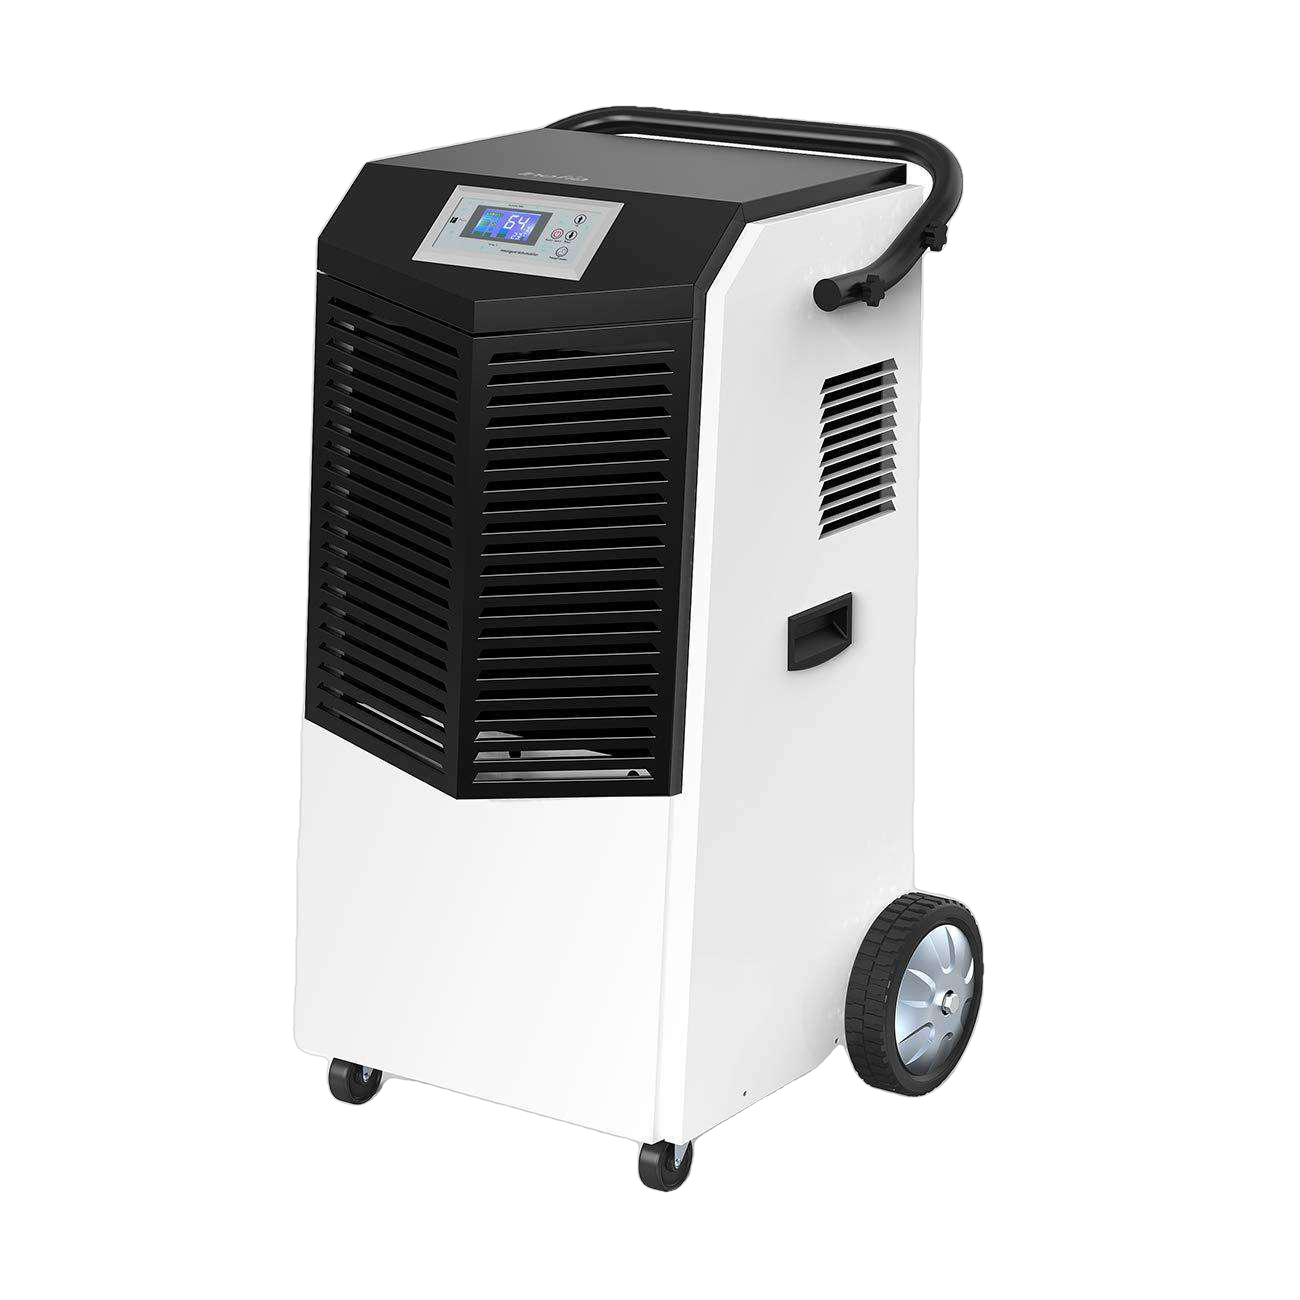 Colzer Inofia-003 Large Building 29 Gallons 232 Pints Largest Capacity Compressor Basement/Warehouse Industrial Commercial Dehumidifier New